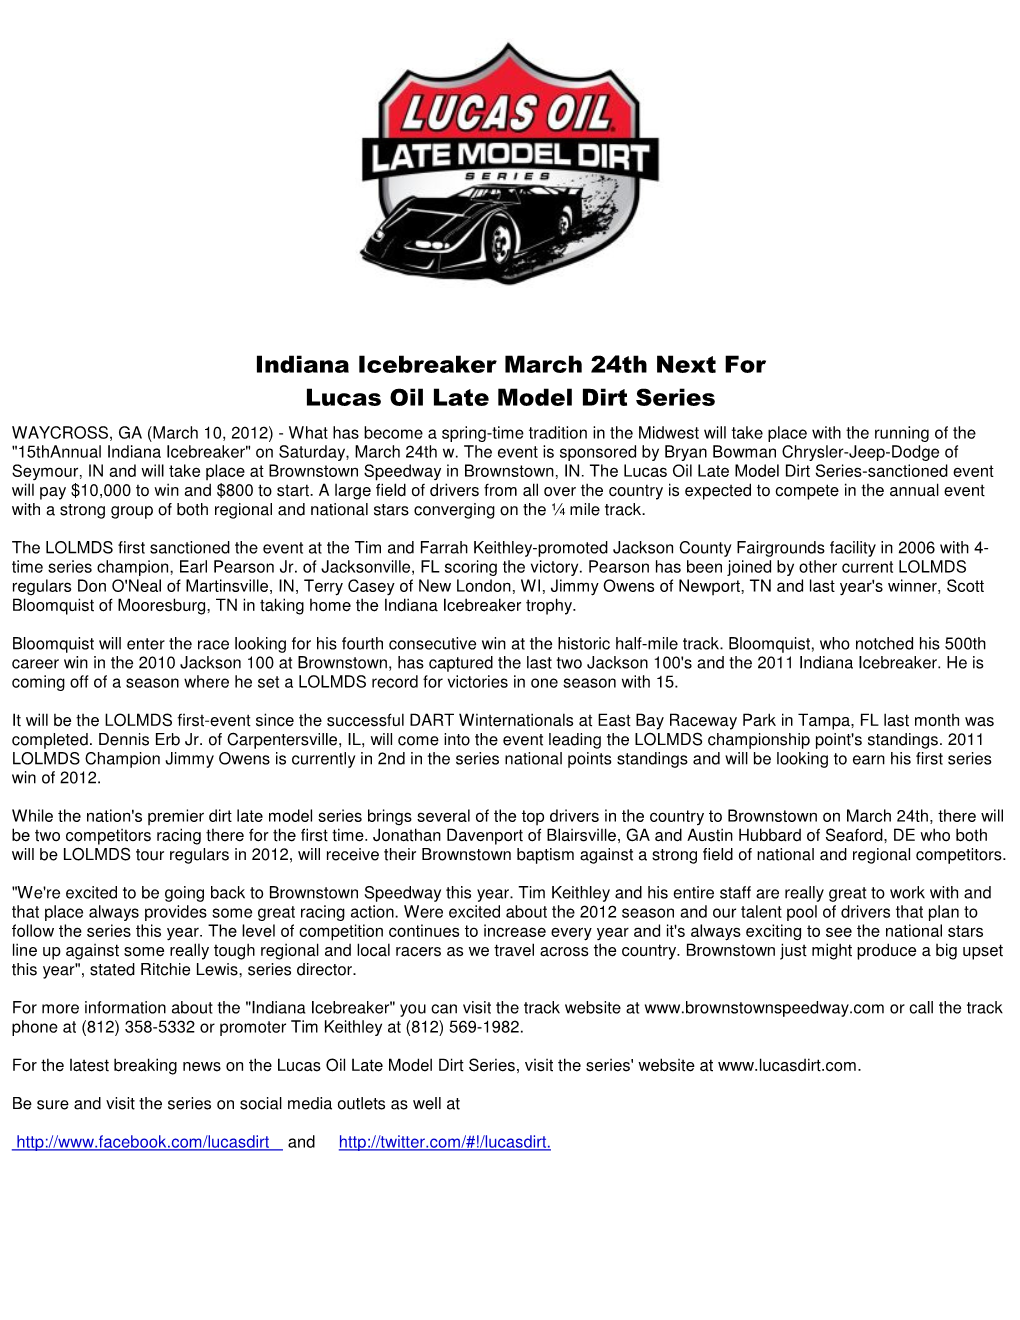 Indiana Icebreaker March 24Th Next for Lucas Oil Late Model Dirt Series